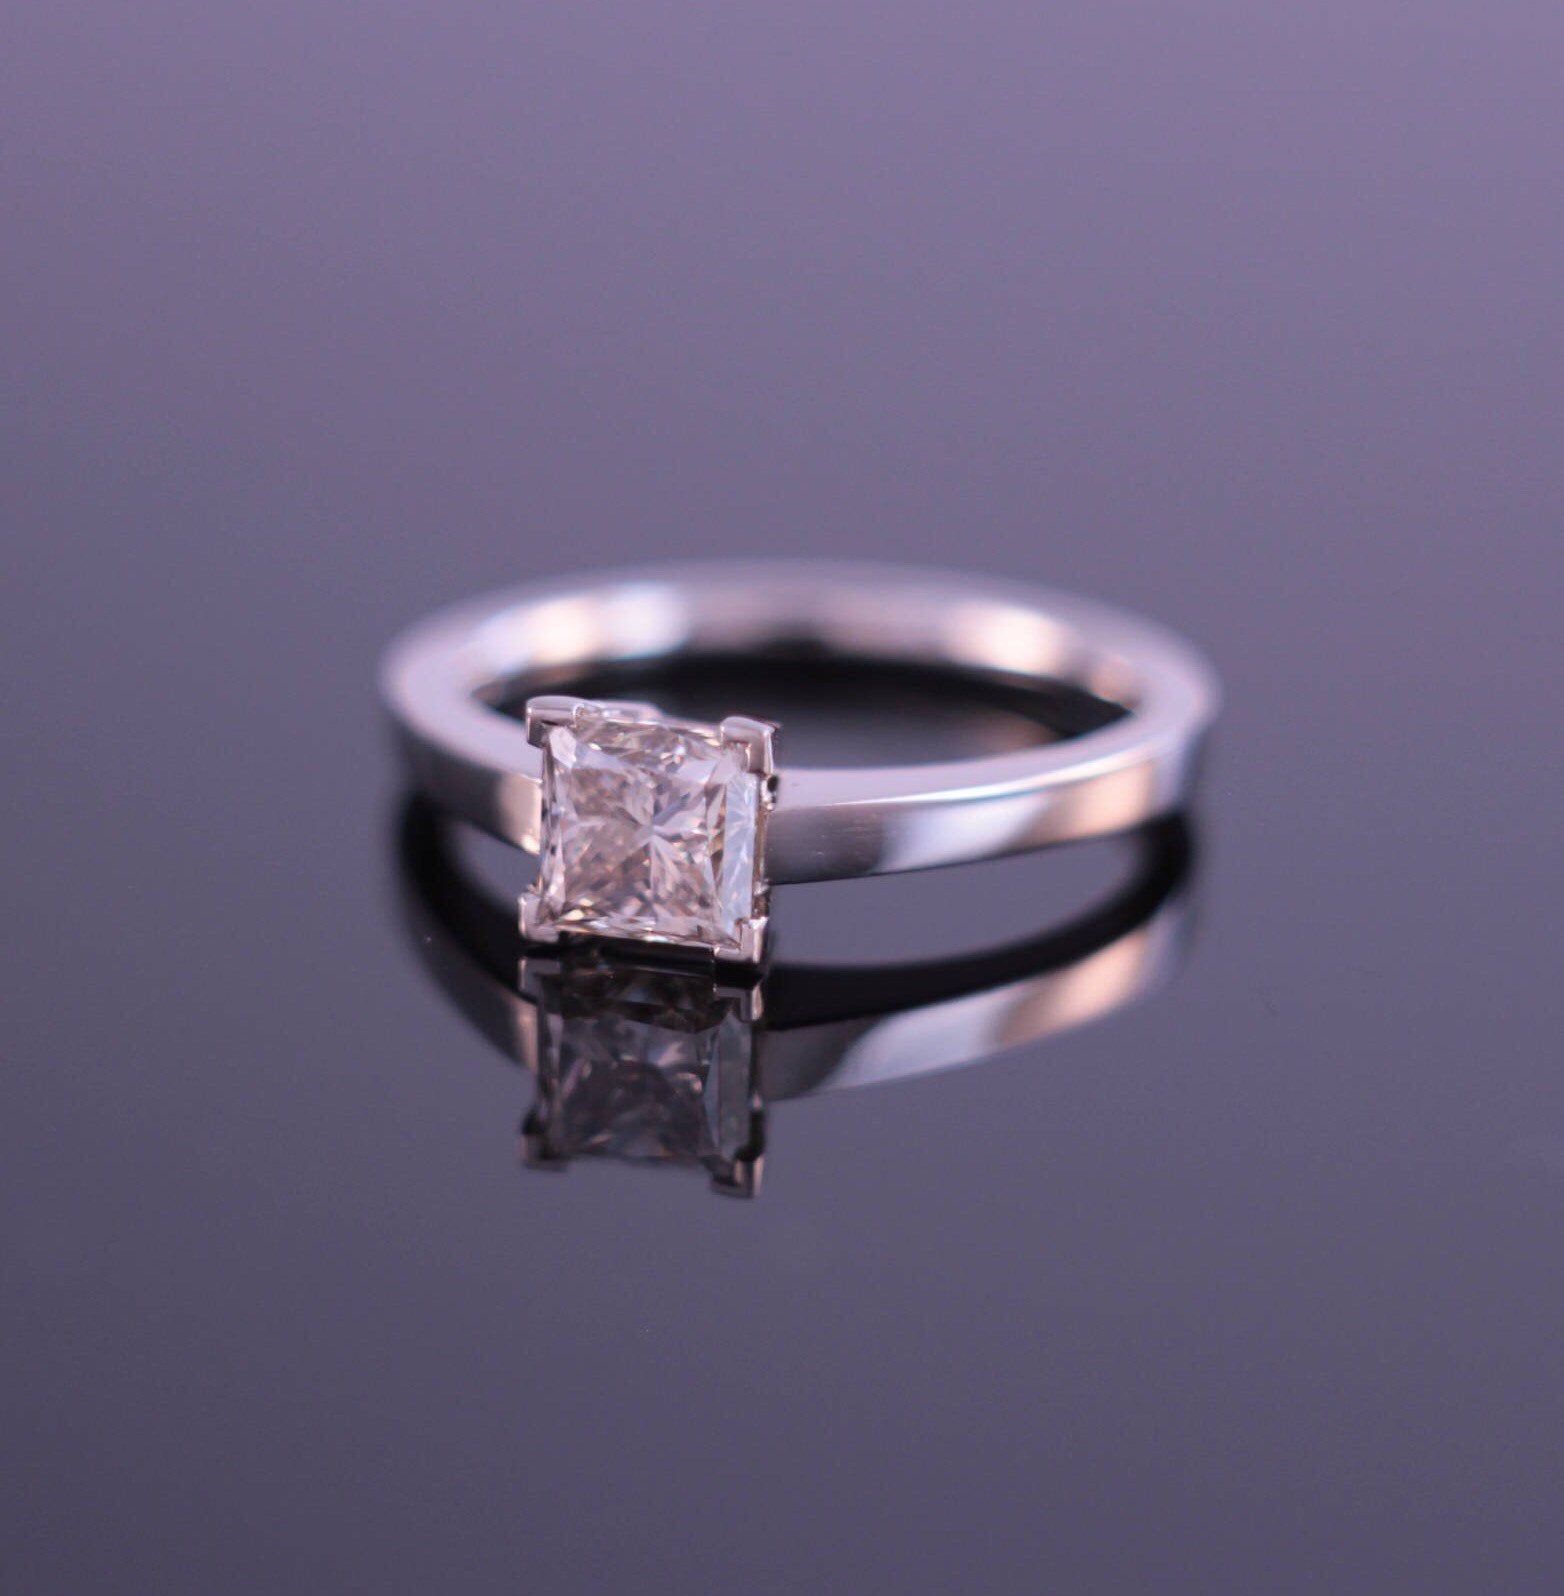 1.06ct Champagne Princess Cut Diamond Engagement Ring in 18ct White Gold